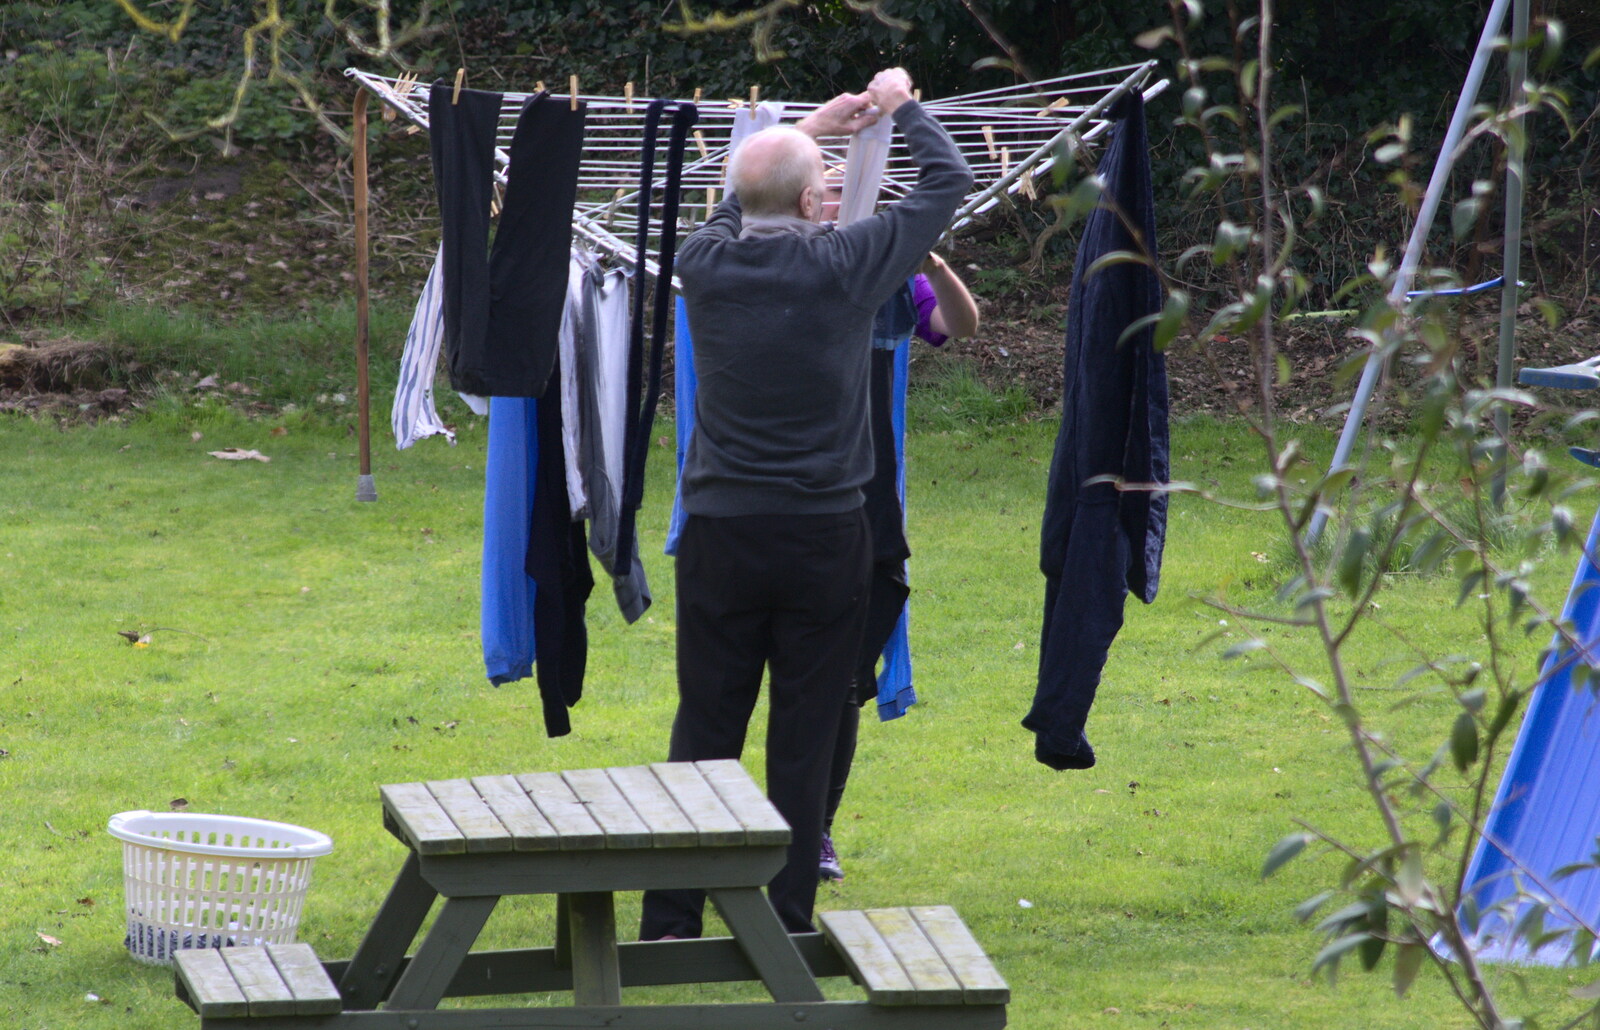 Grandad at the washing line from Digger Action and other March Miscellany, Suffolk and London - 21st March 2017